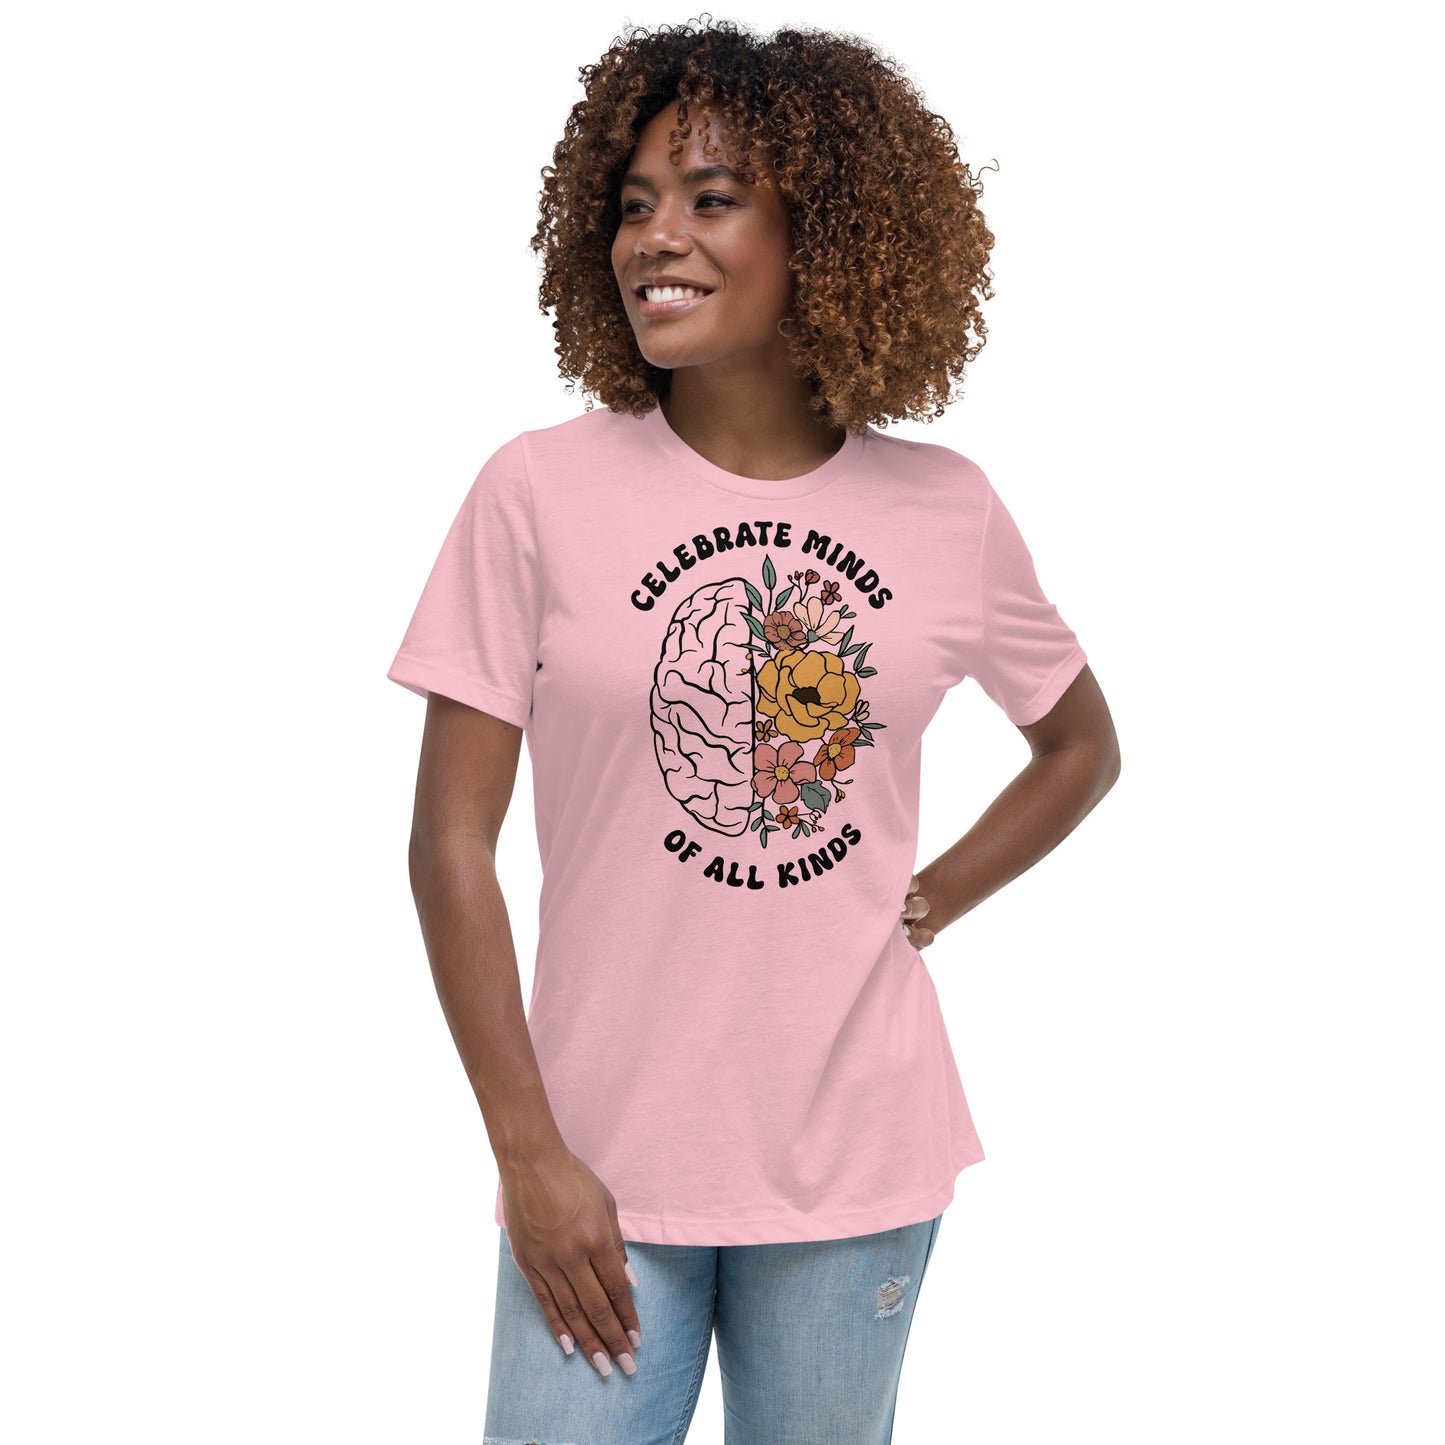 Celebrate Minds of All Kinds - Women’s T-shirt